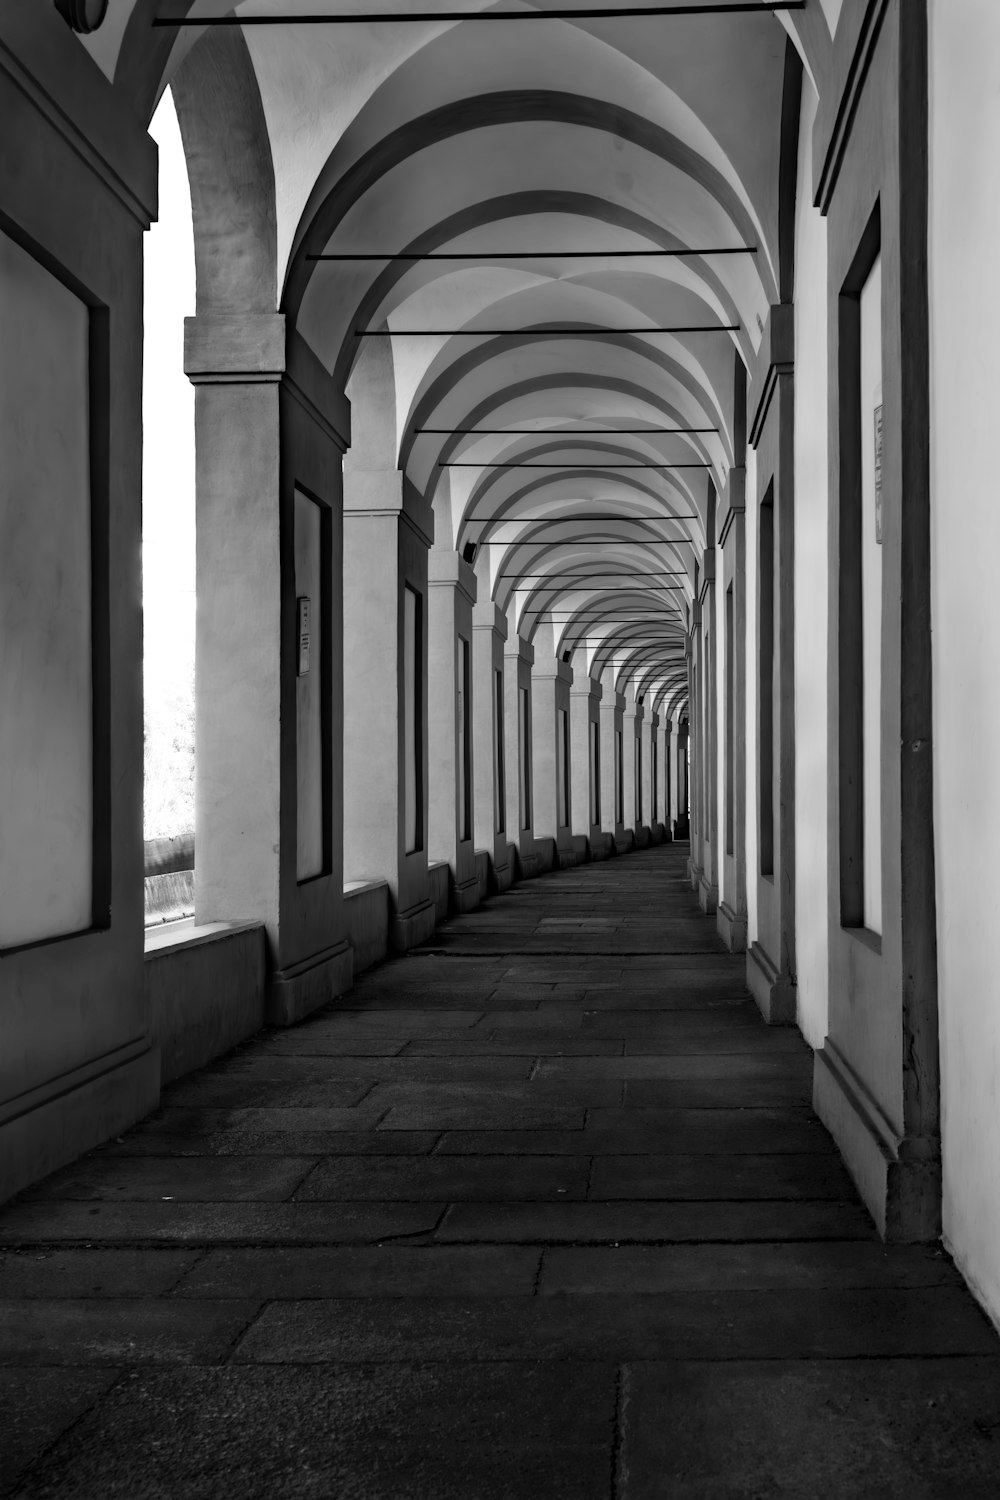 a black and white photo of a row of arches